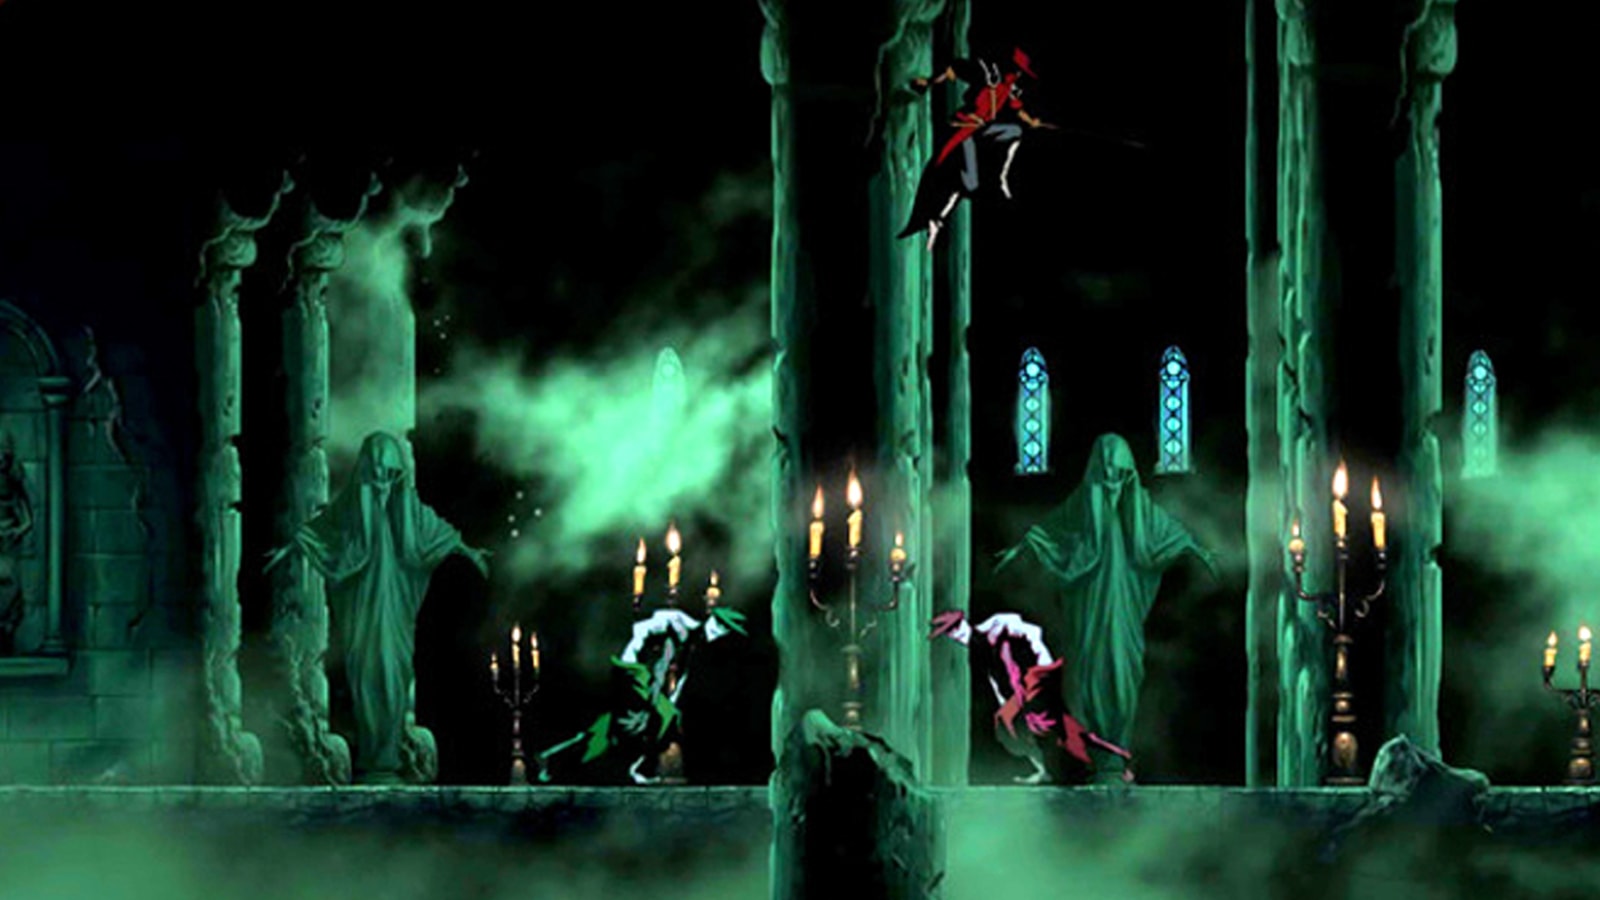 A swordsman in red leaps above two zombies in a decrepit church